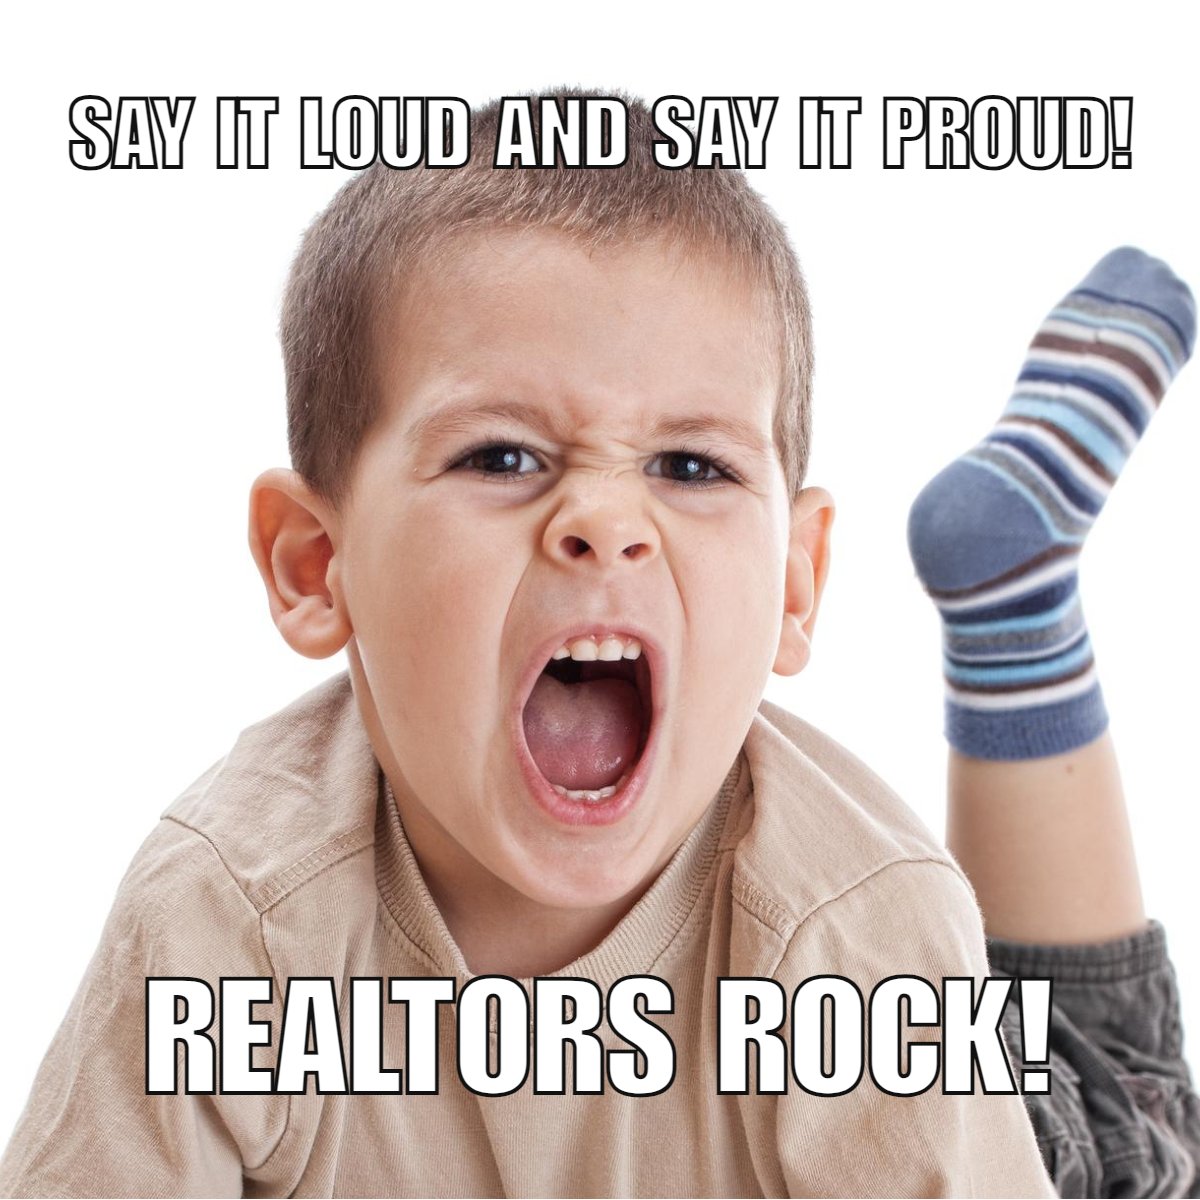 The unsung heroes of the real estate world!

Say it with me:

Realtors Rock!

 #RealEstateHeroes #HomeDreams
 #swflrealtor #swflrealestate #floridarealestate #florida #newconstruction #homebuying #homebuyingprocess #homebuyingtips #househunting #fsbo #Teamswflelite